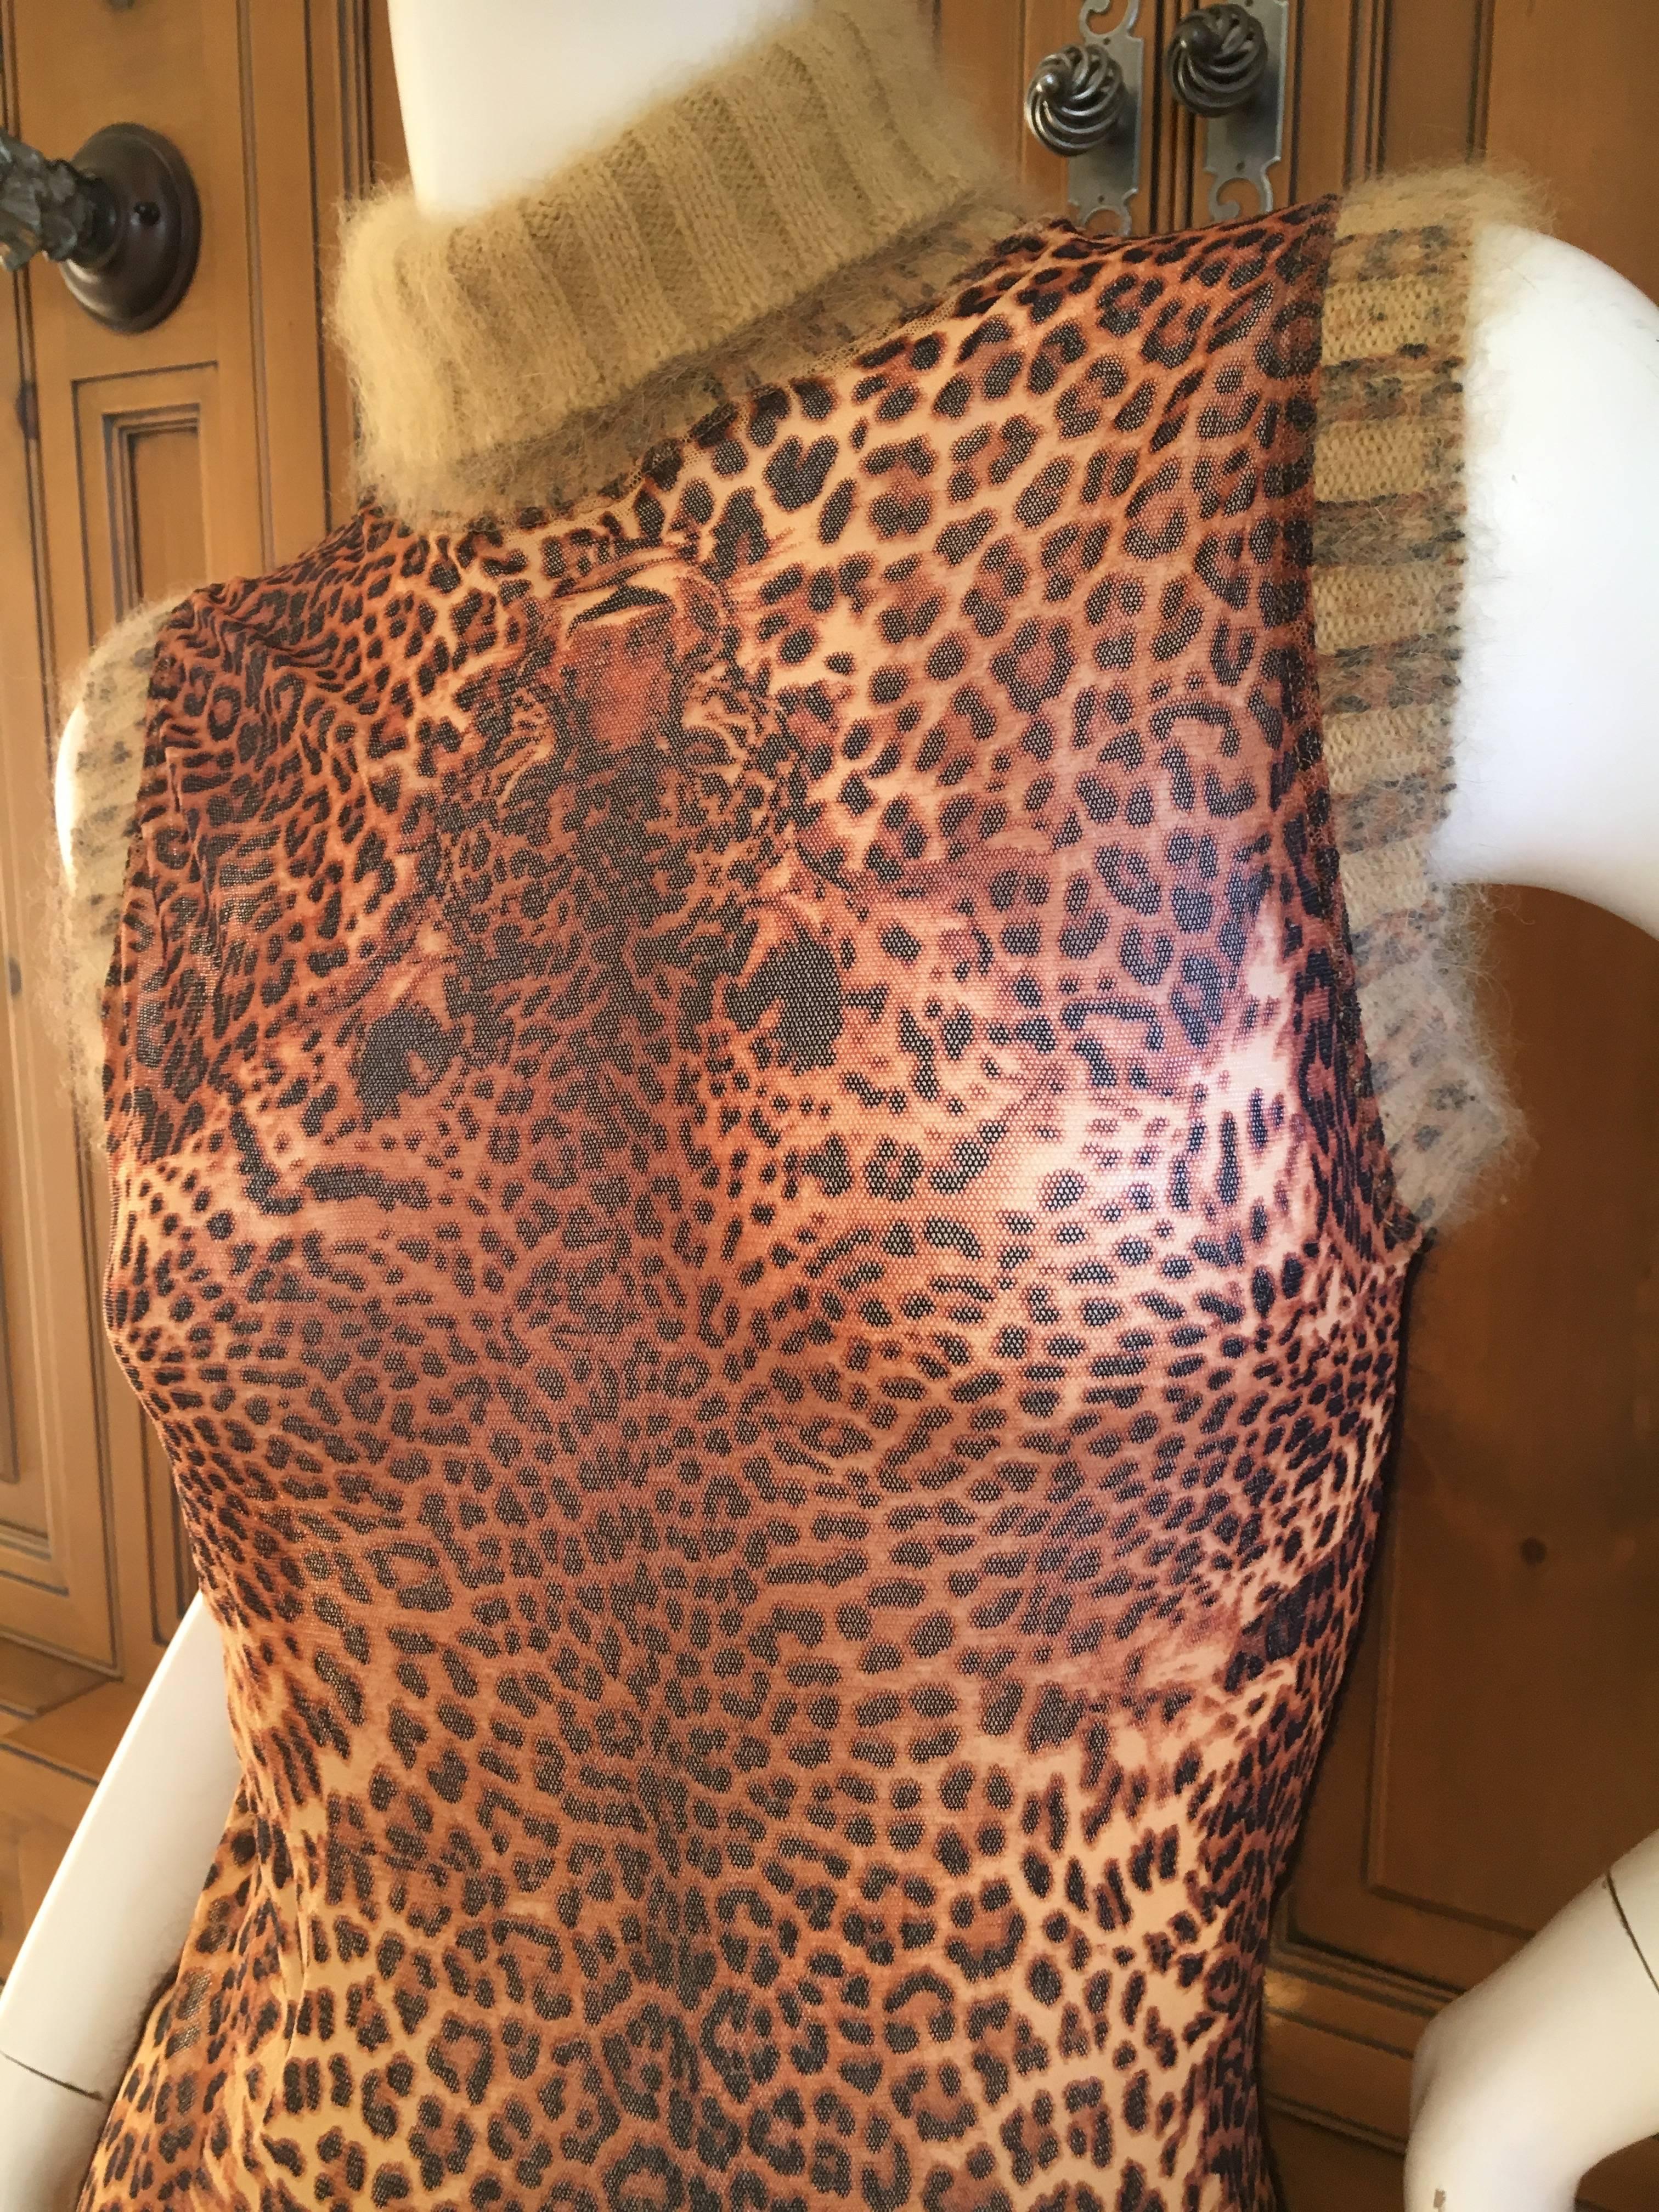 Jean Paul Gaultier Maille 1990's Leopard Sleeveless Top with Ribbed Knit Trim.
From the Jean Paul Gaultier Maille Femme label.
Size L
Bust 38"
Length 24"
Excellent condition